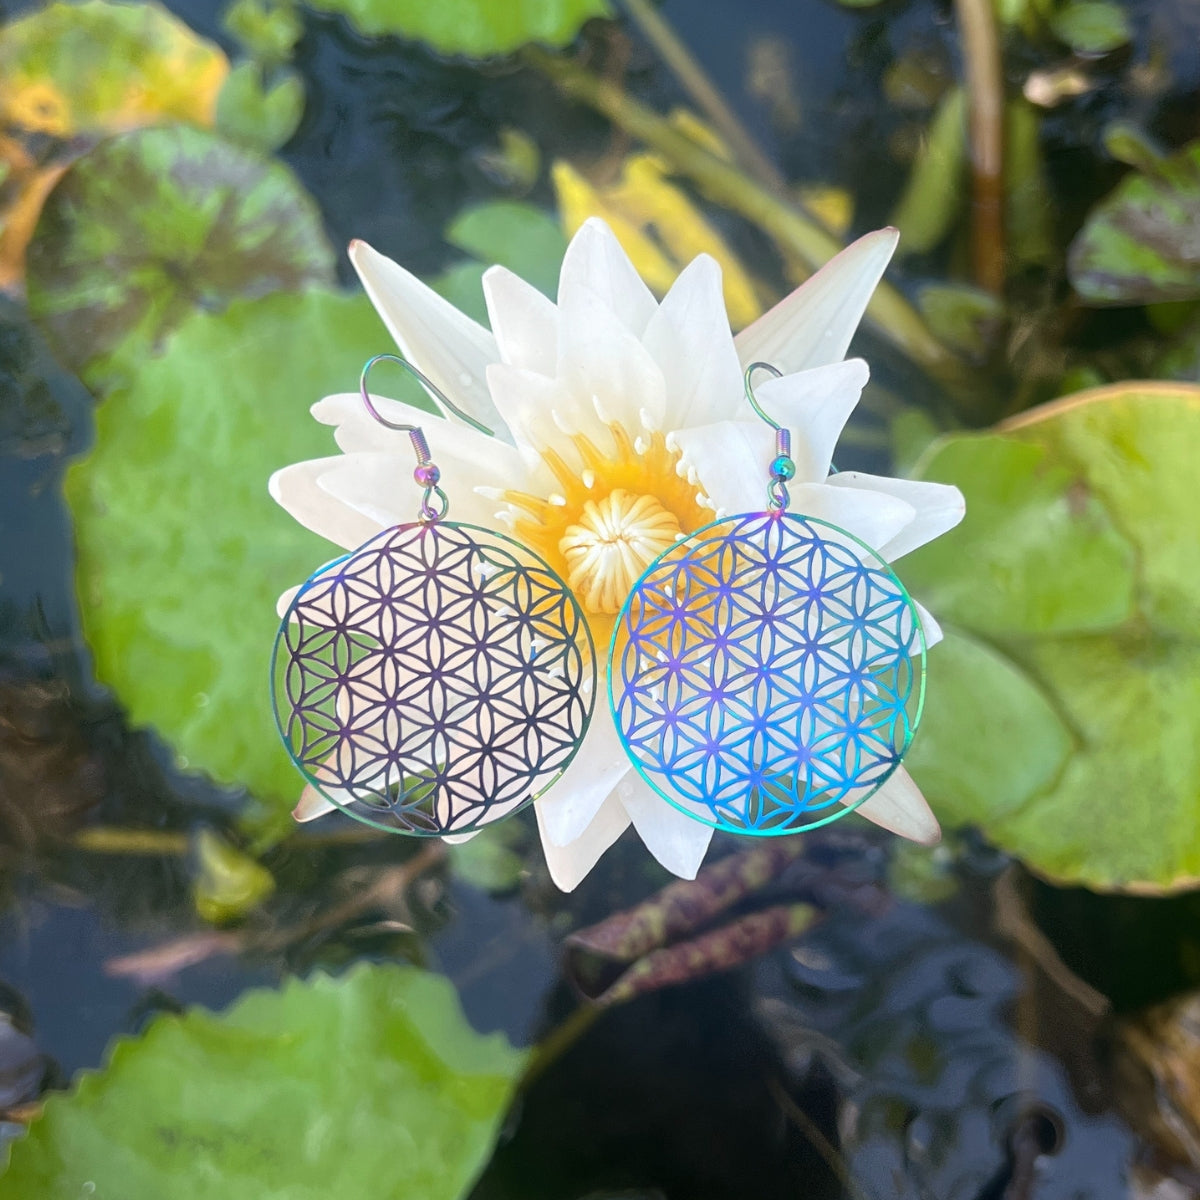 <strong>Wear the "Rainbow Flower of Life Earrings" to infuse your look with the vibrant colors of the rainbow and let them be a symbol of your unique, bohemian journey</strong>.